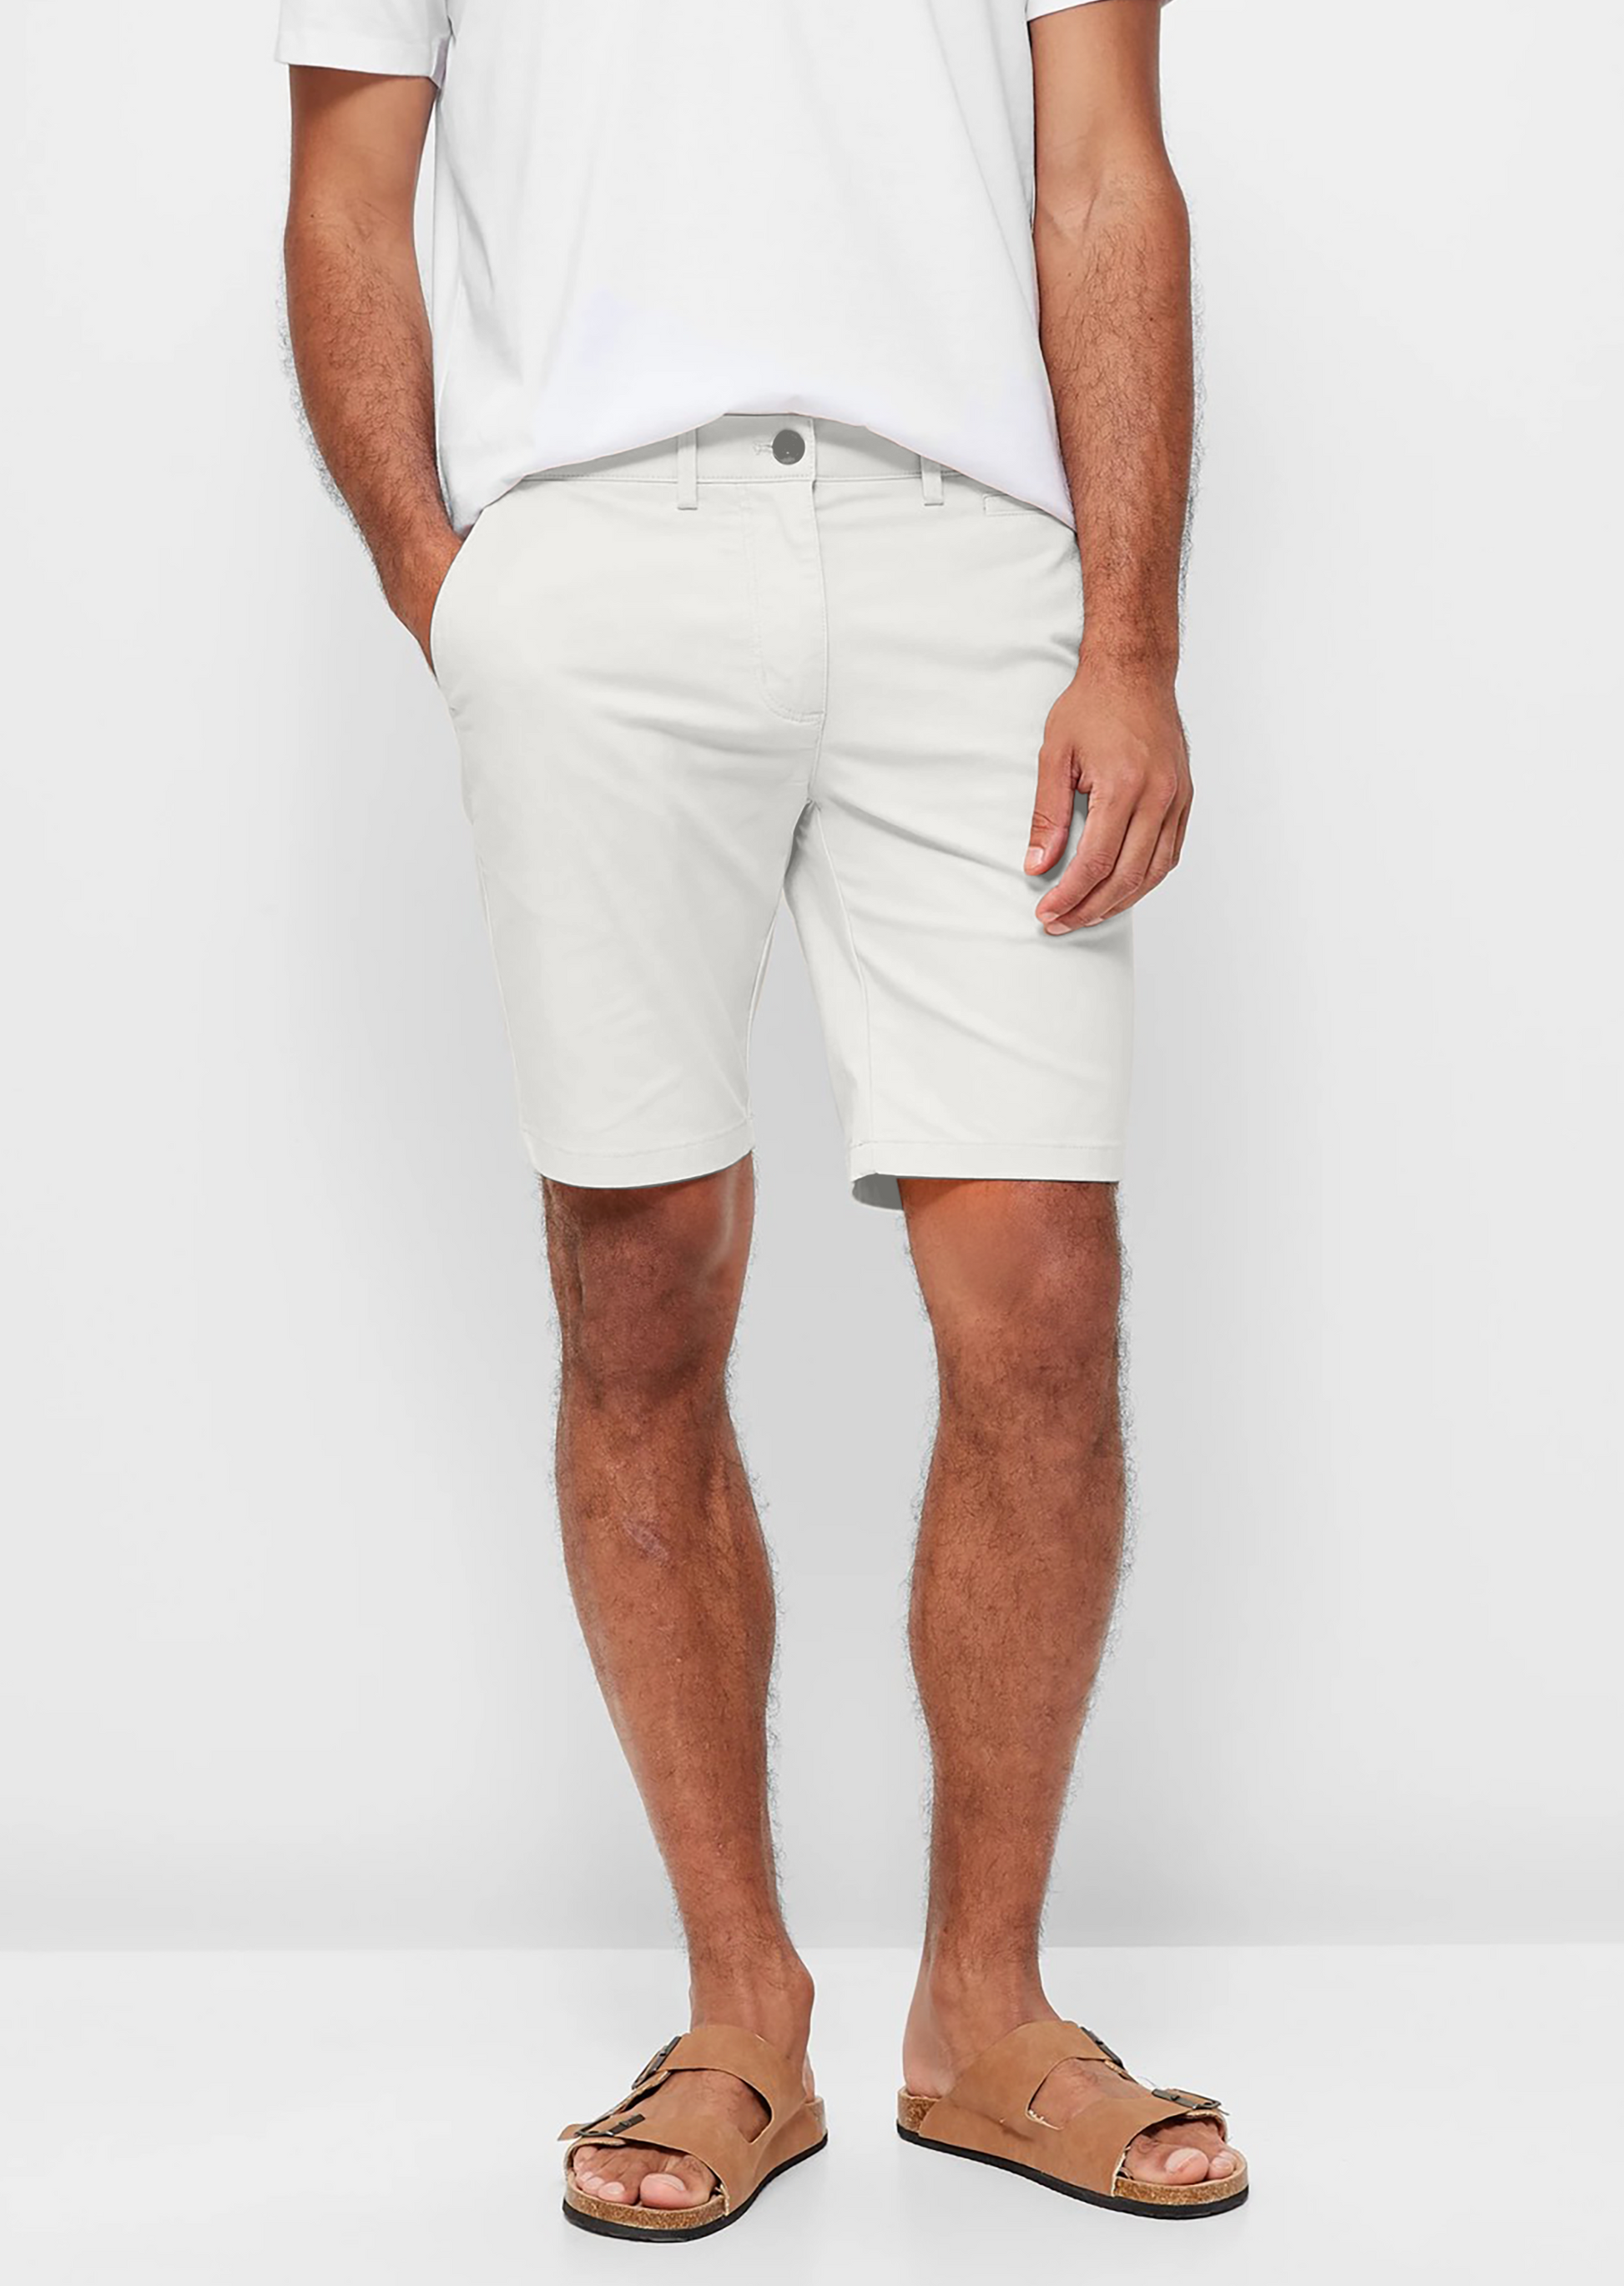 Mens White chinos shorts with front slanted pockets, jetted back pockets. zip fly fastening and brown horne buttons on the waistband and back pockets, the fit is a slim fit, this is worn with a white tee and white t-shirt